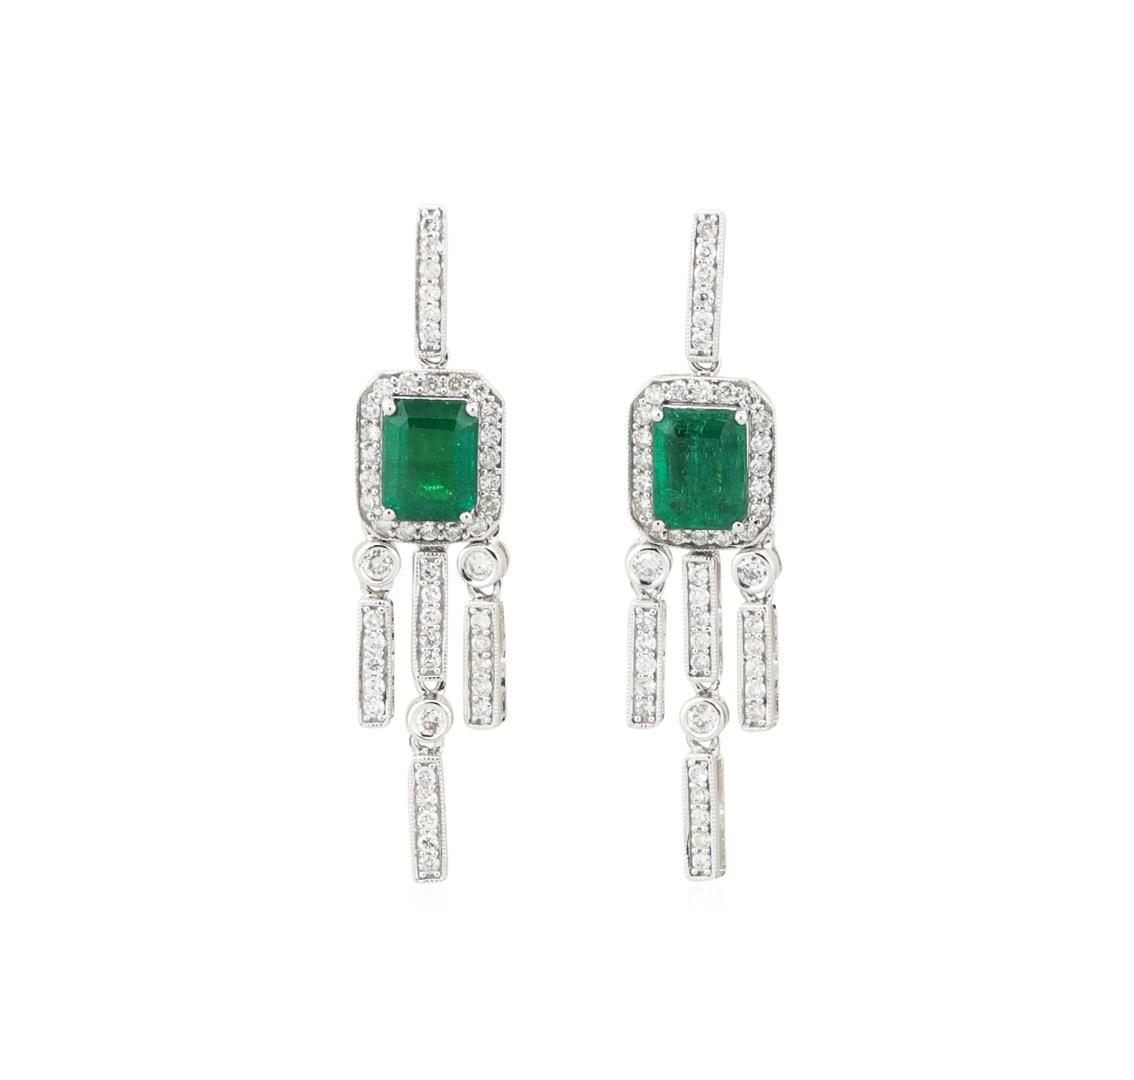 3.2 ctw Emerald and Diamond Earings - 18KT White Gold